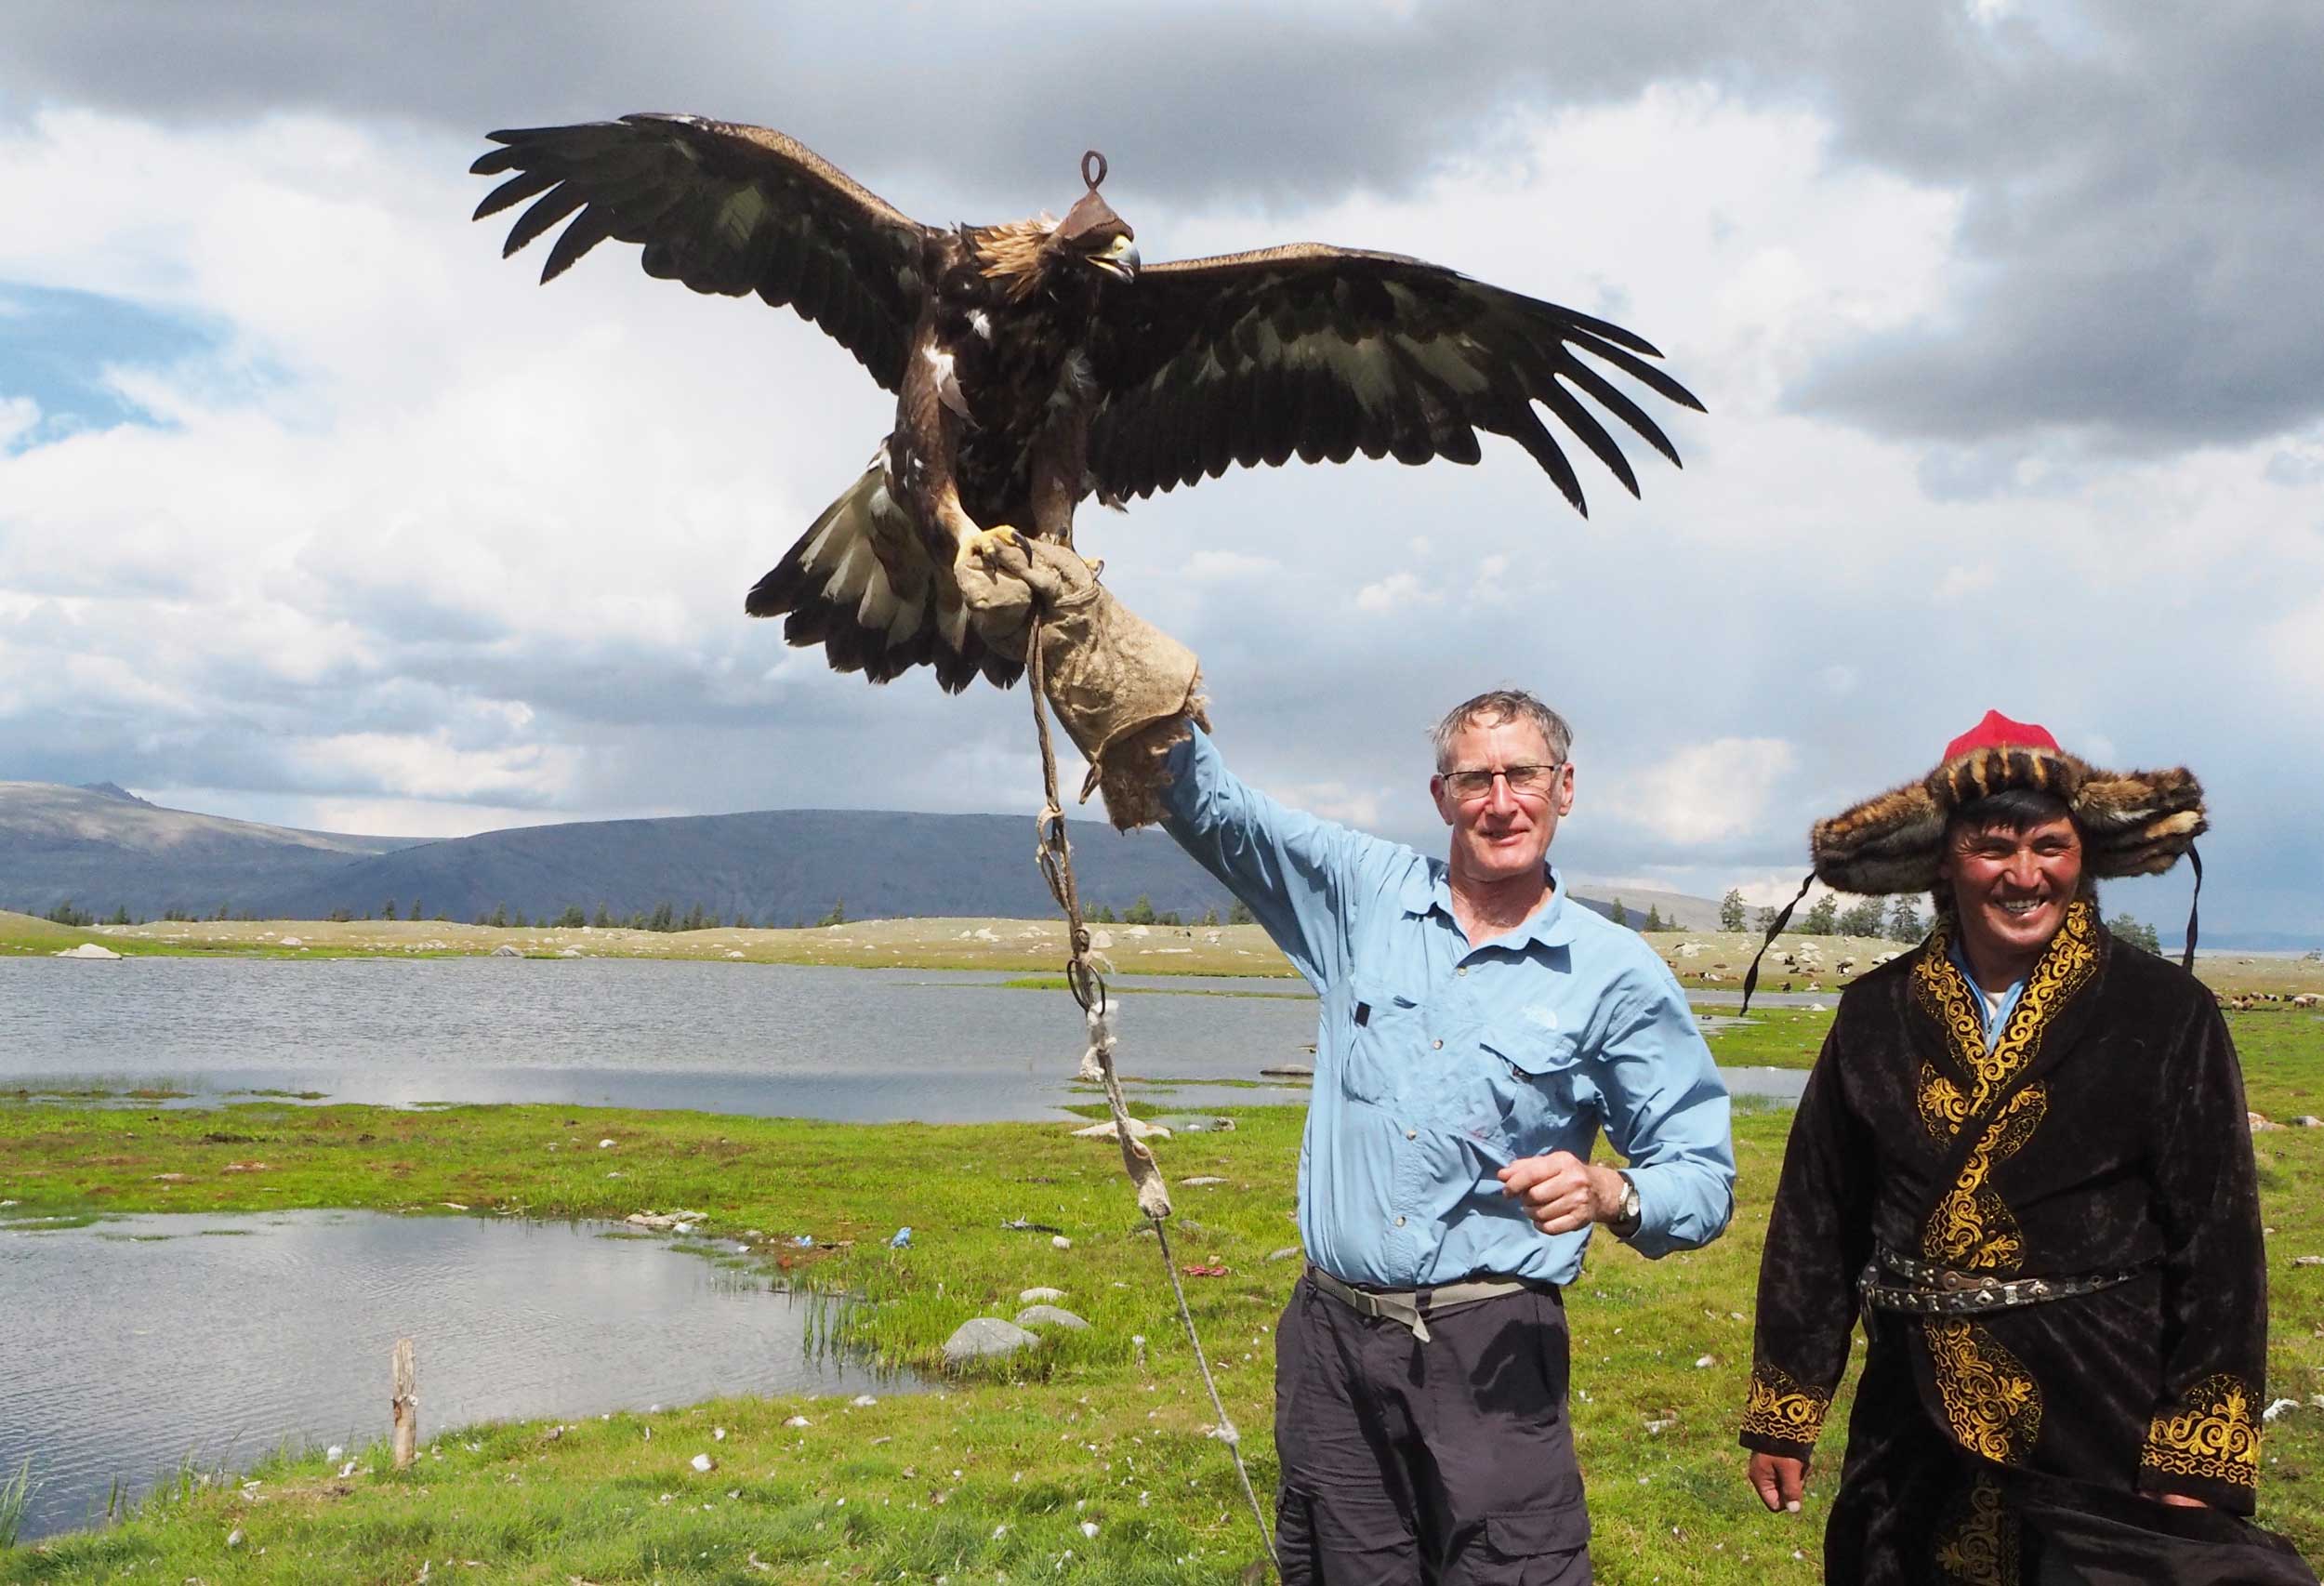 A western man holding an eagle aloft with a smiling Mongolian man next to him.